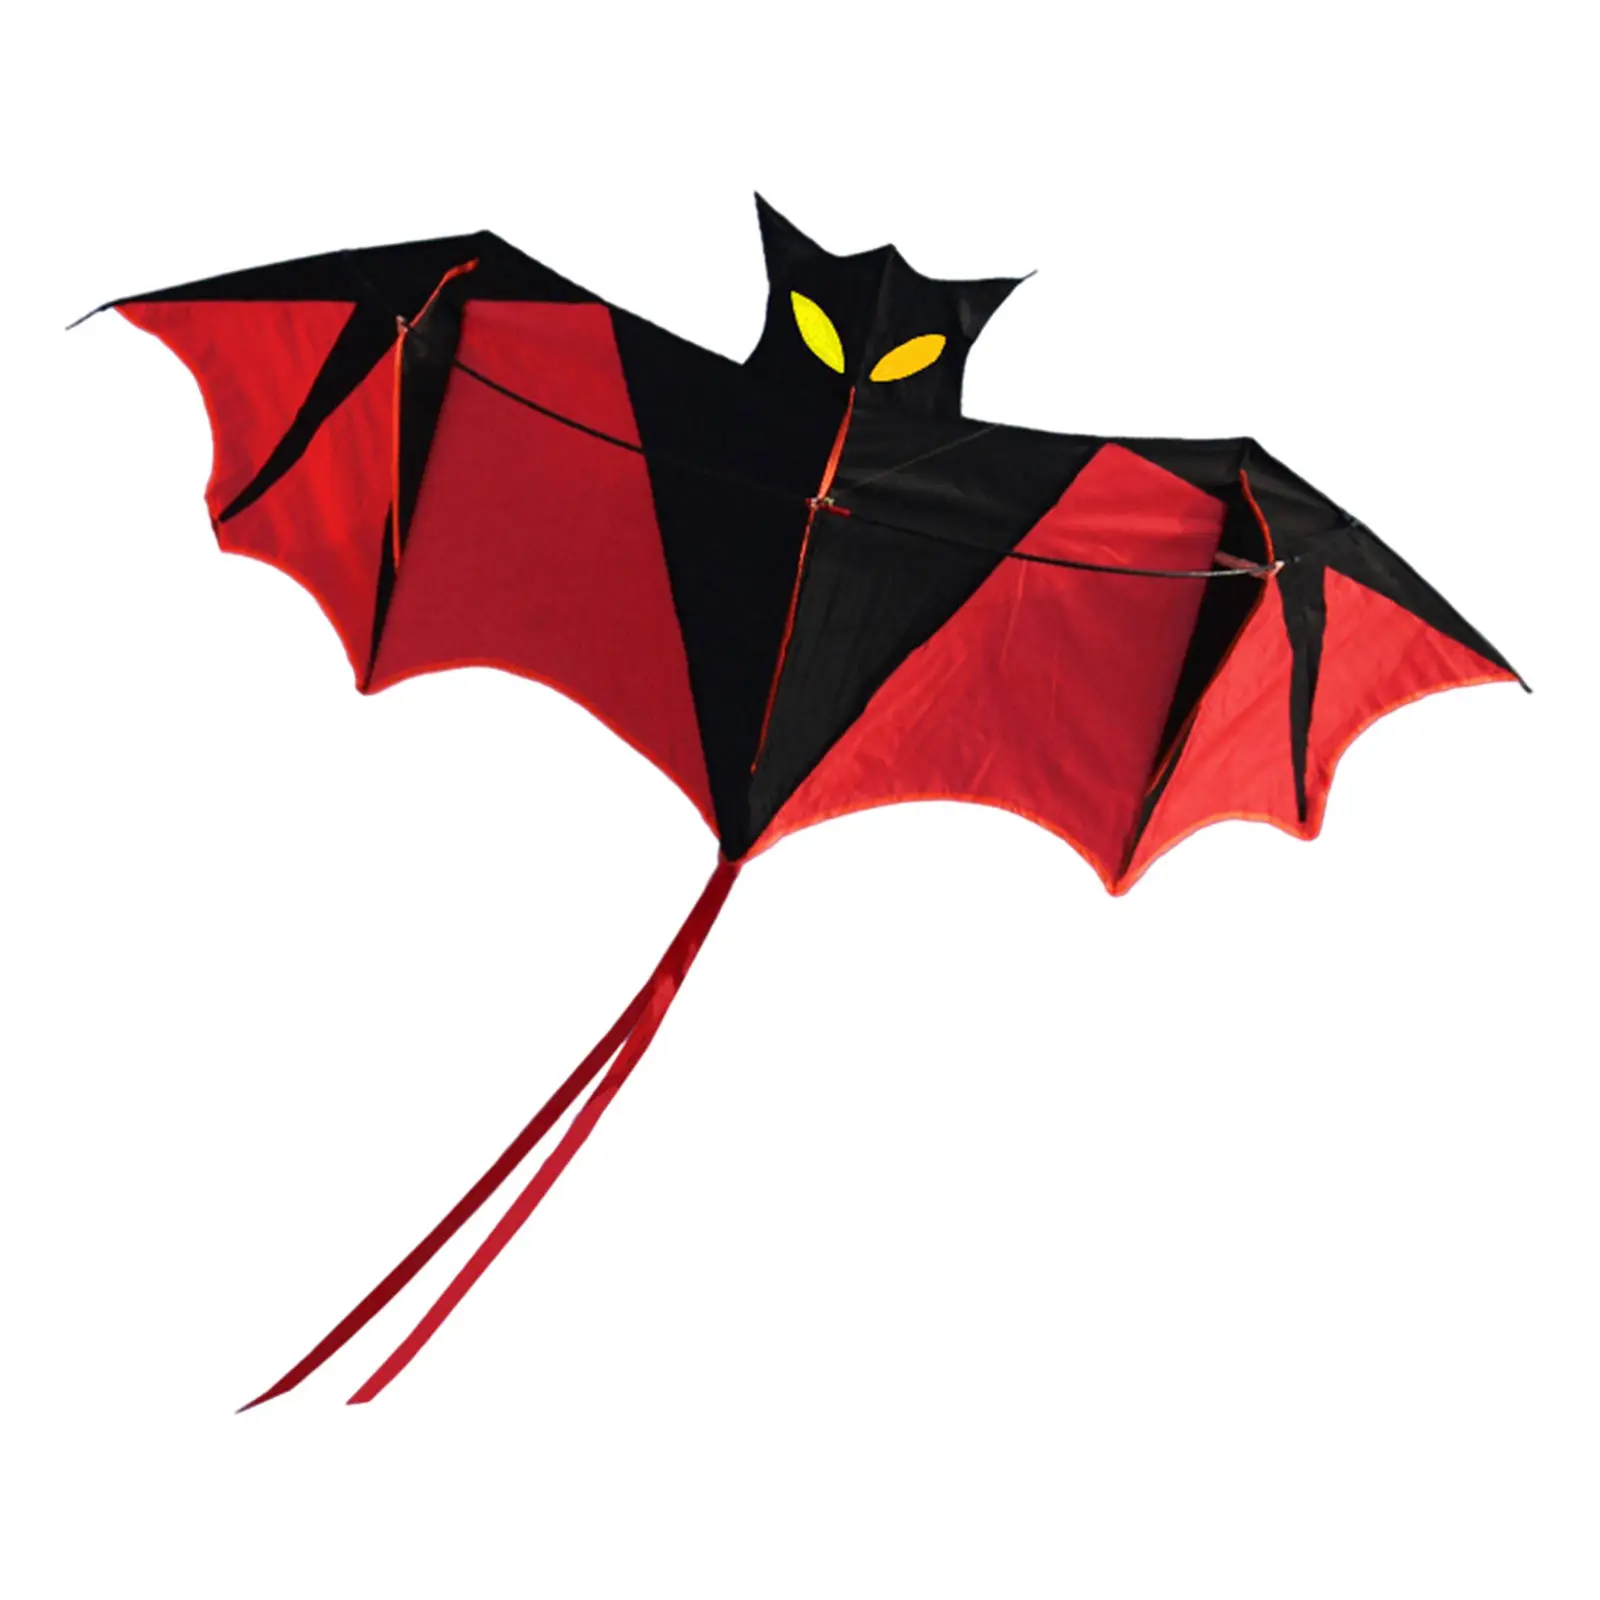 Outdoor Bat Kite Easy to Fly Kids Toys Handle with 30M String Family Outdoor Games for Garden Park